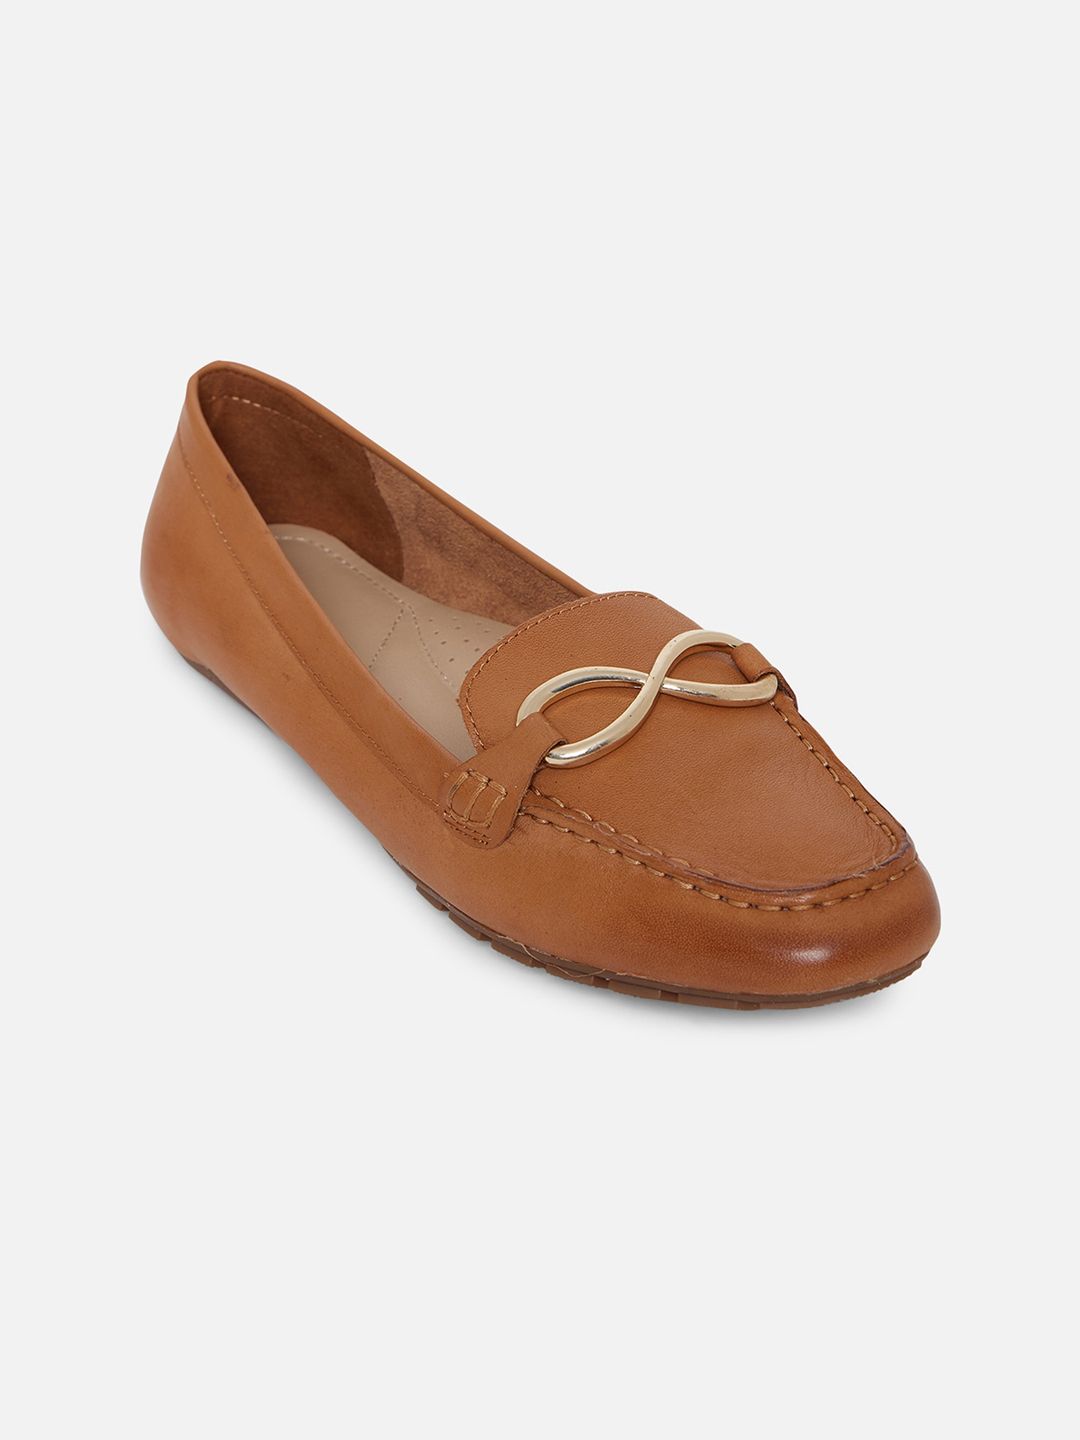 ALDO Women Brown Leather Slip-on Loafers Price in India